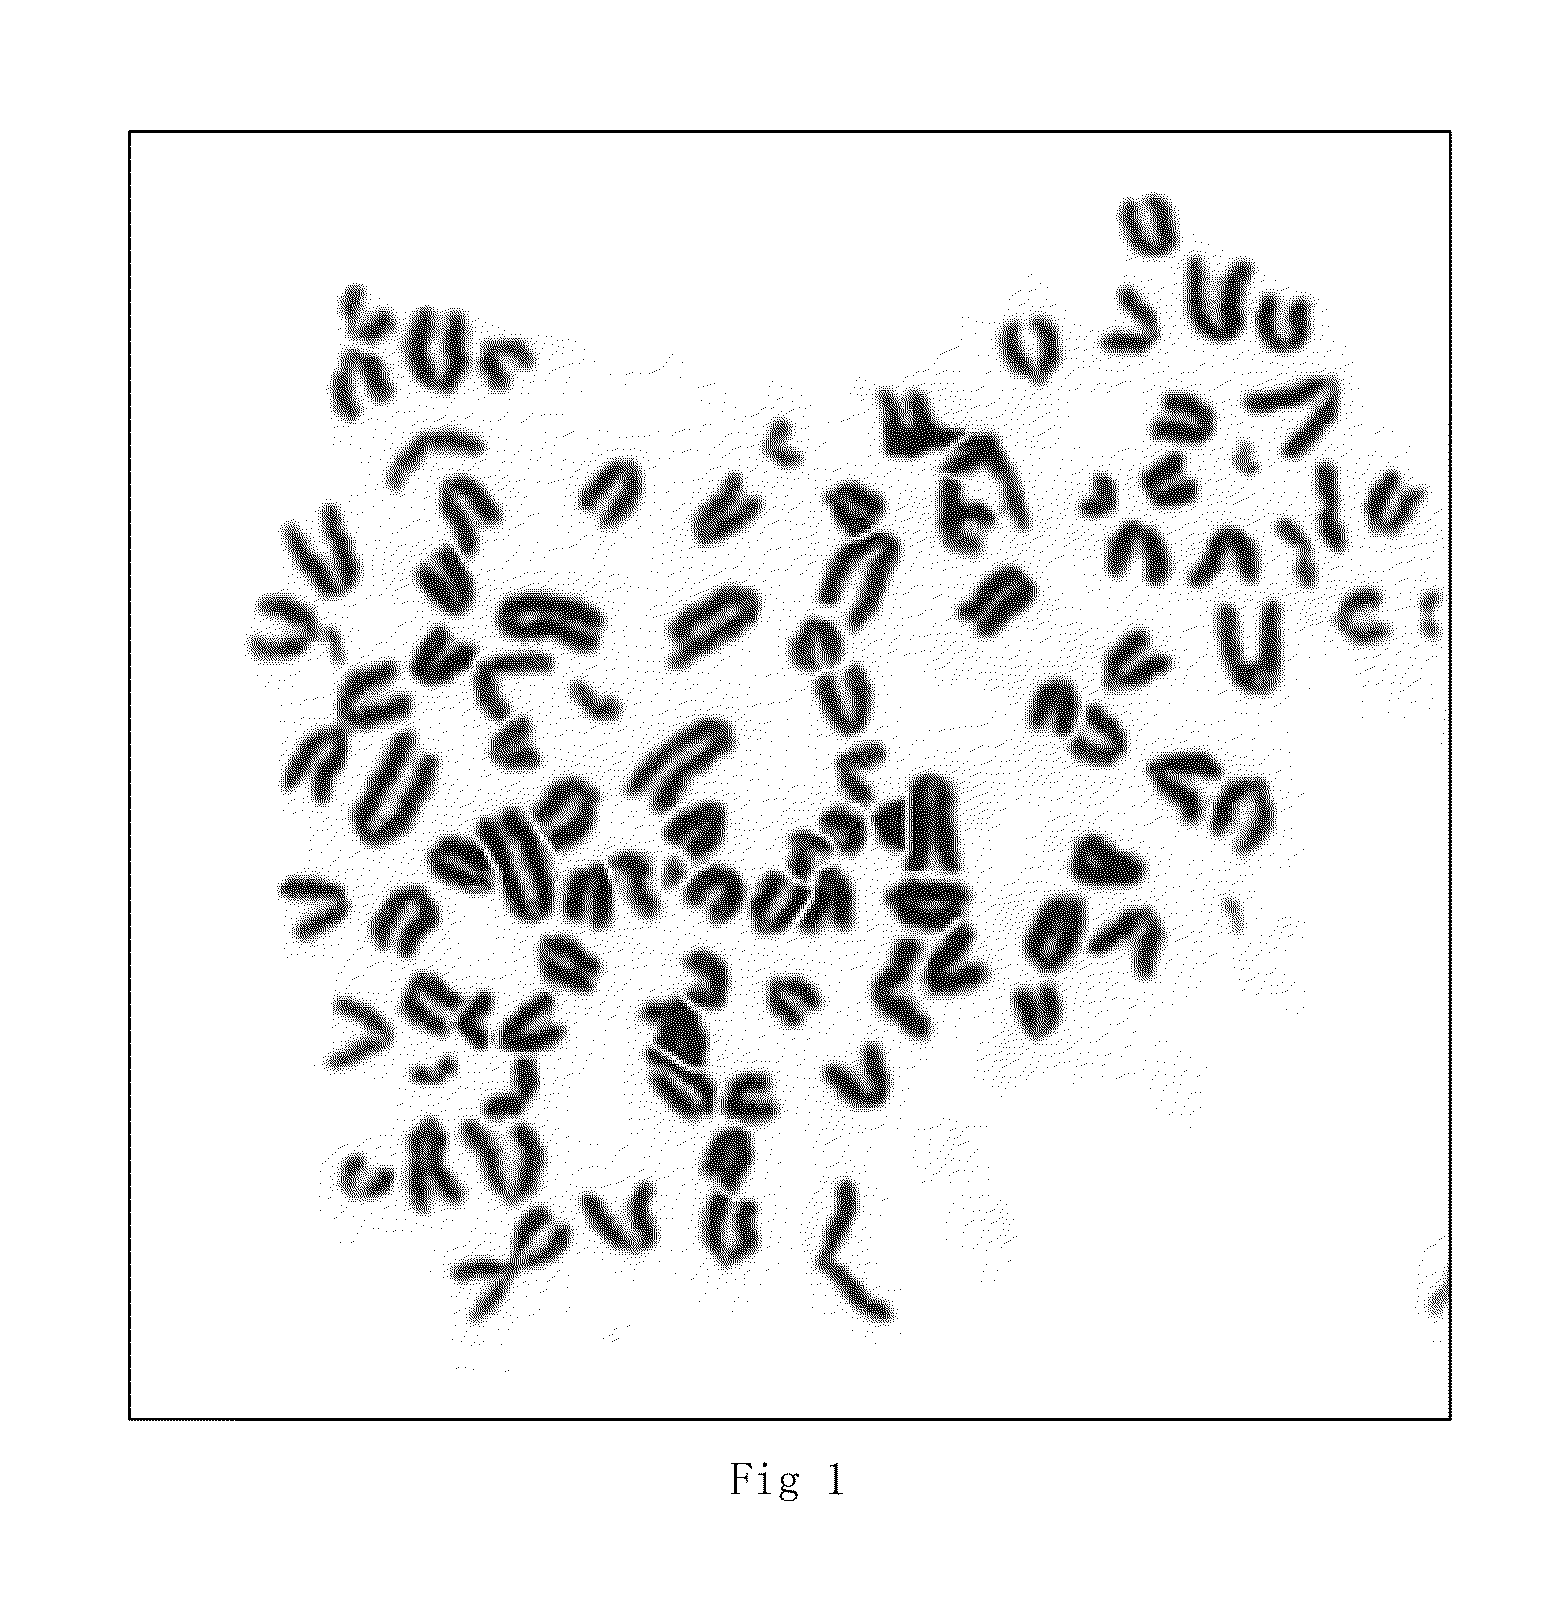 Monoclonal antibody against human non-small cell lung carcinoma and use thereof